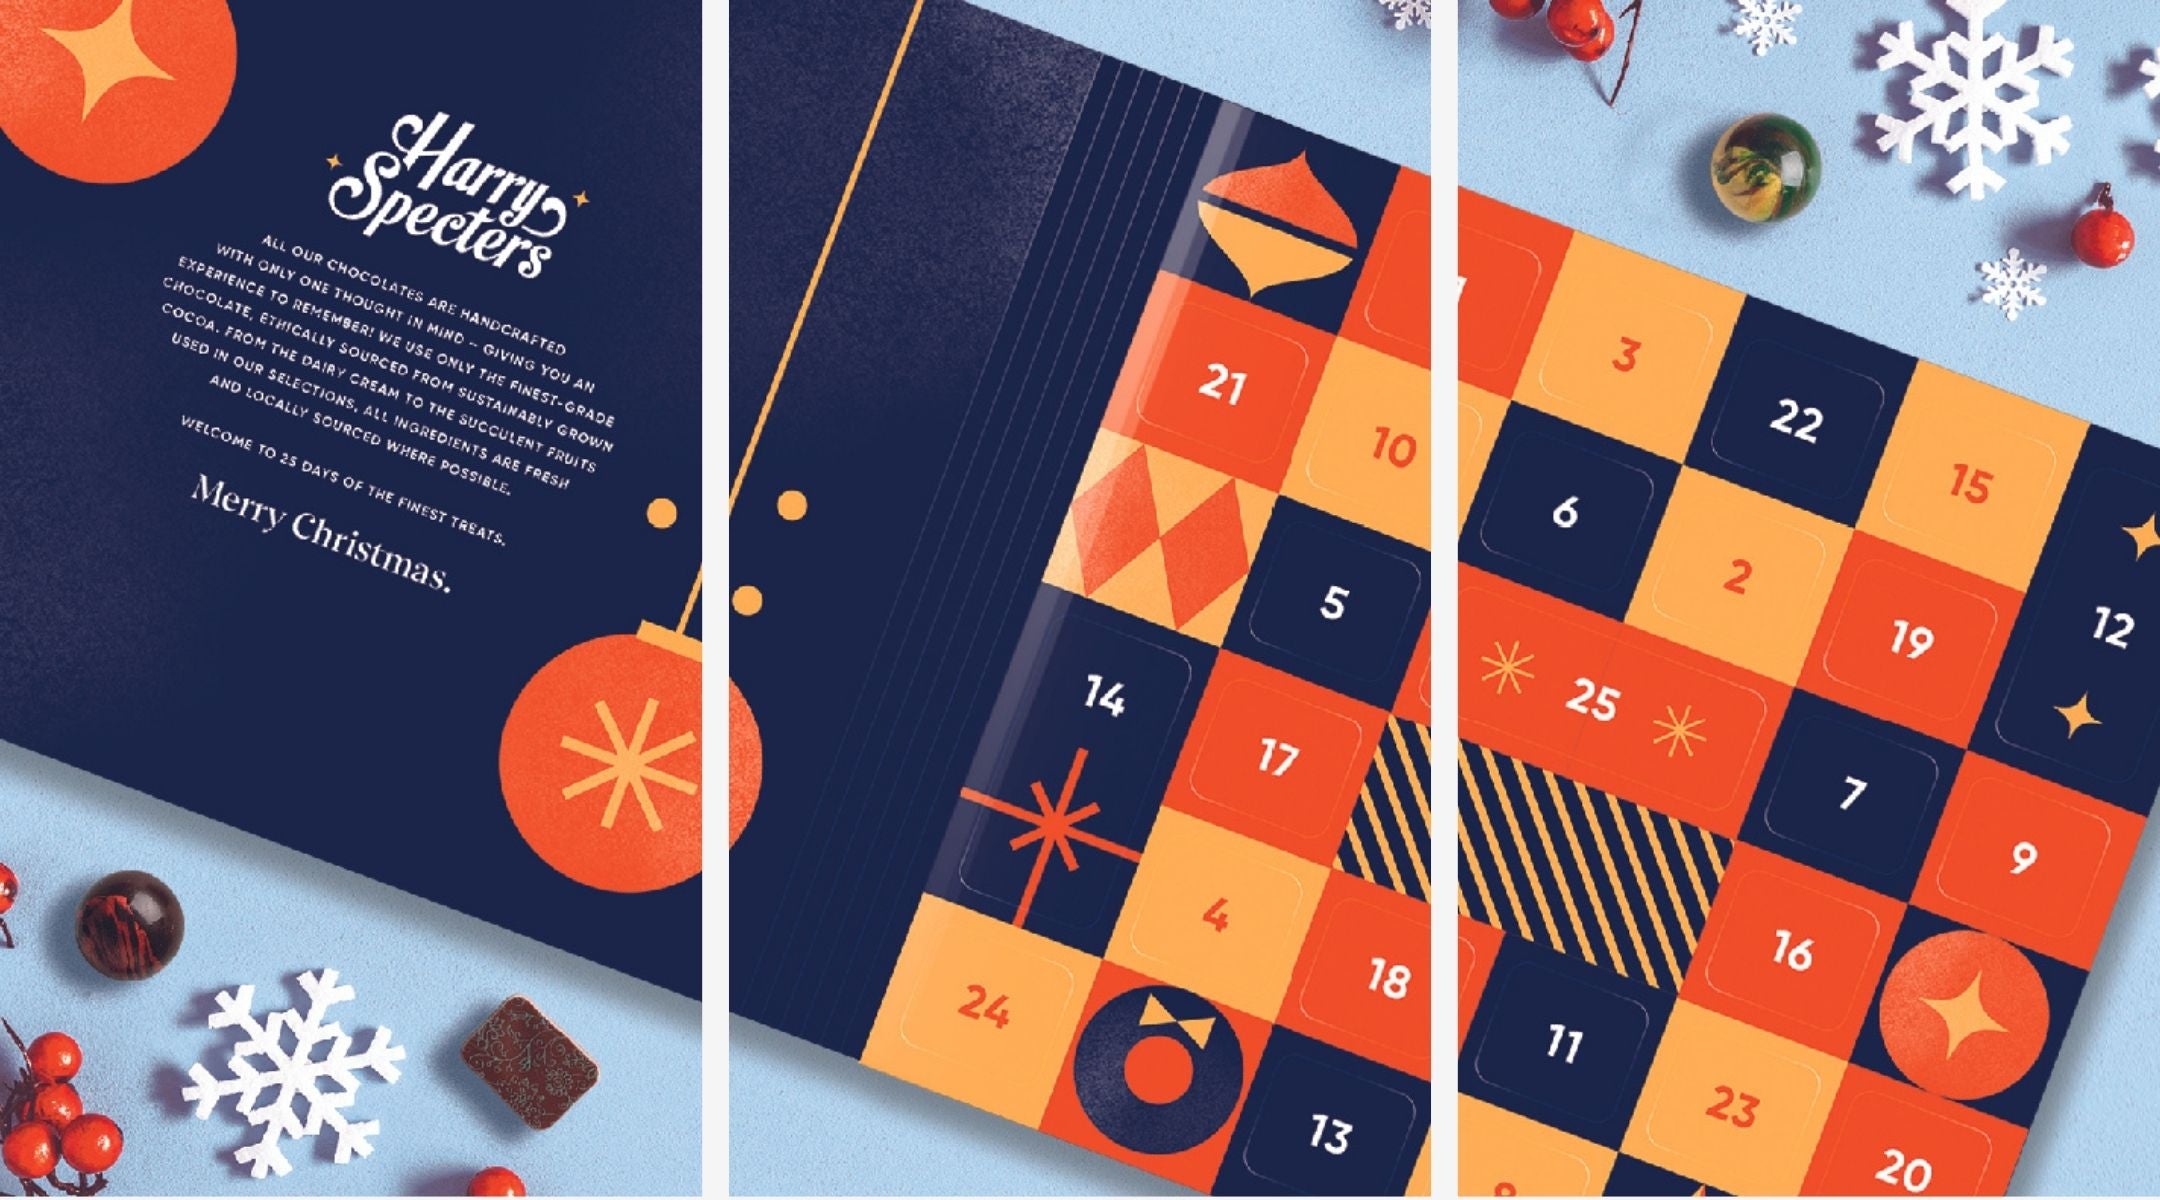 A luxury chocolate advent calendar with numbered doors counting down to Christmas